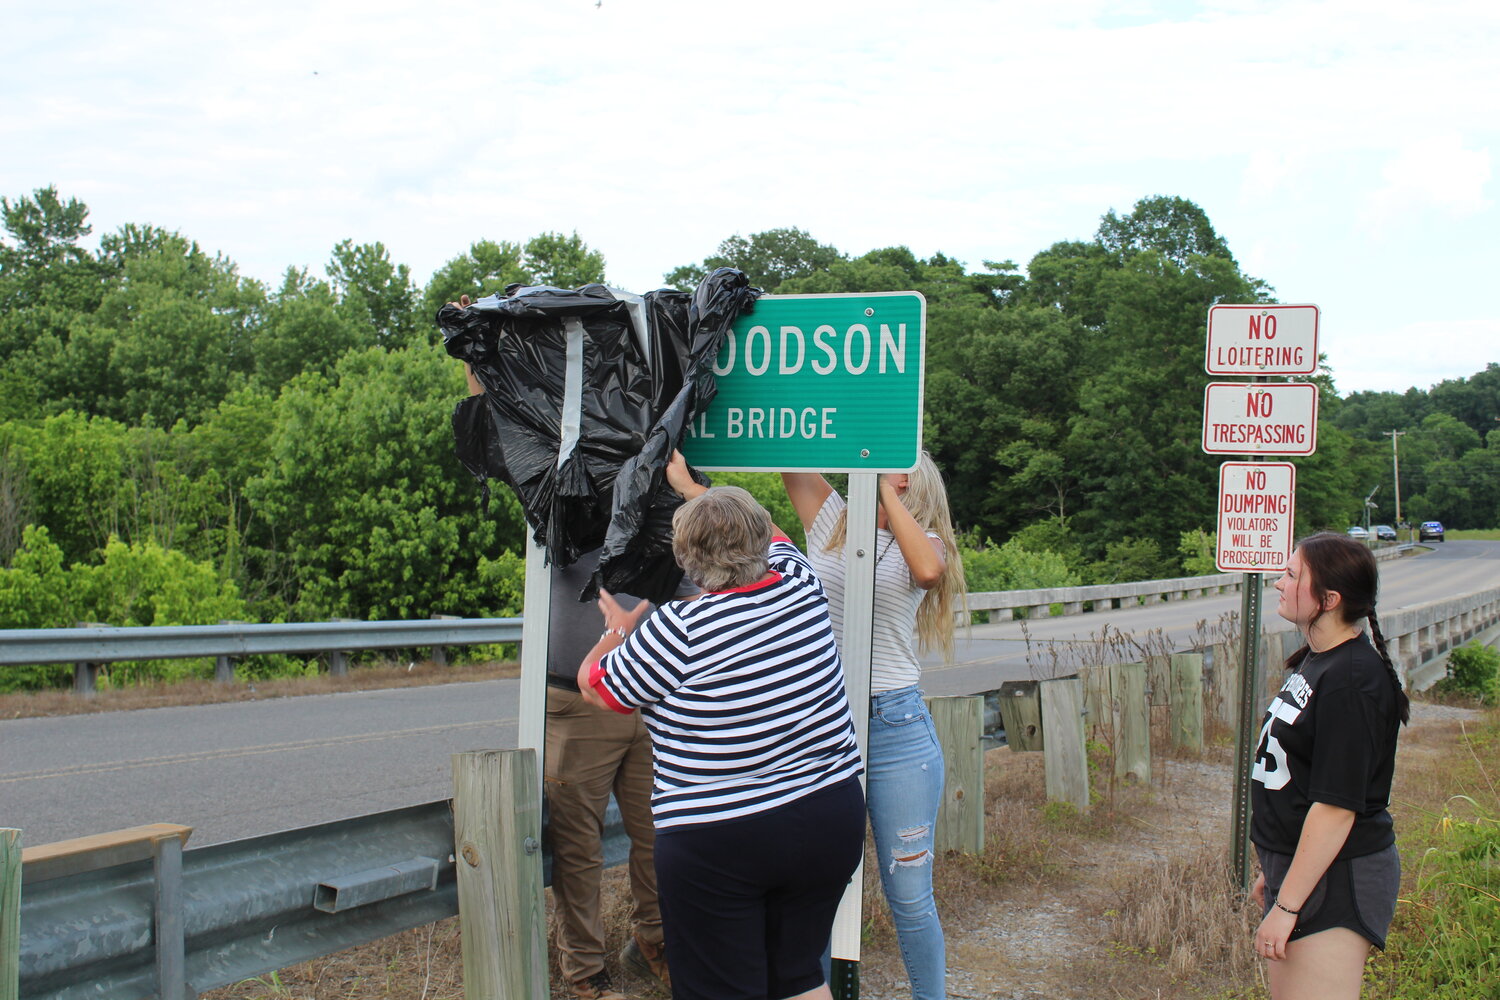 Members of the Woodson family unveil the sign identifying the bridge.